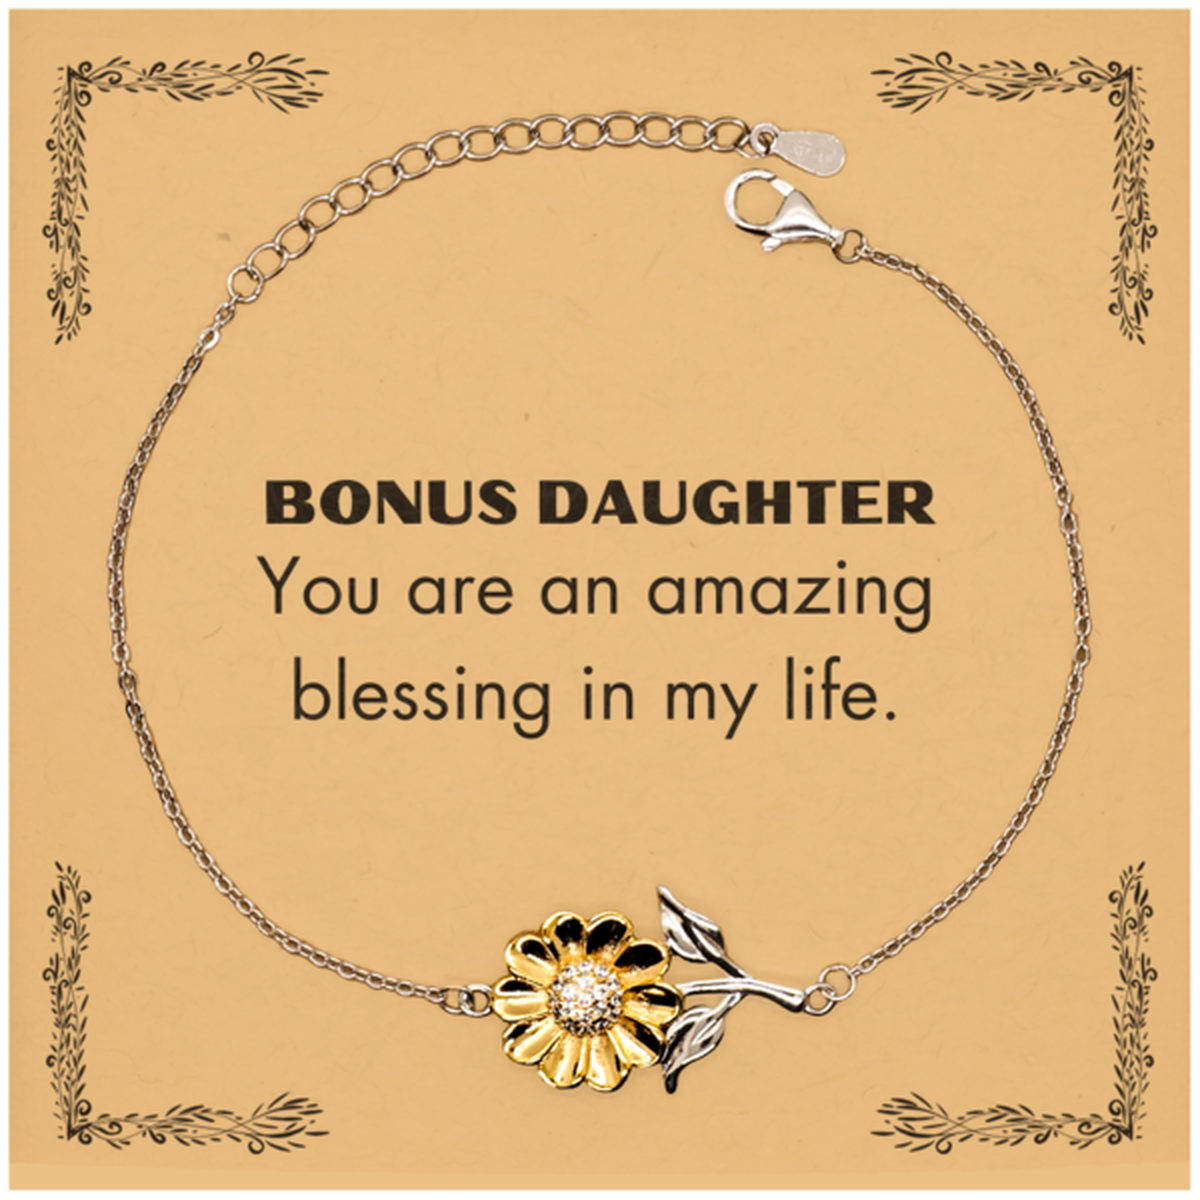 Bonus Daughter Sunflower Bracelet, You are an amazing blessing in my life, Thank You Gifts For Bonus Daughter, Inspirational Birthday Christmas Unique Gifts For Bonus Daughter